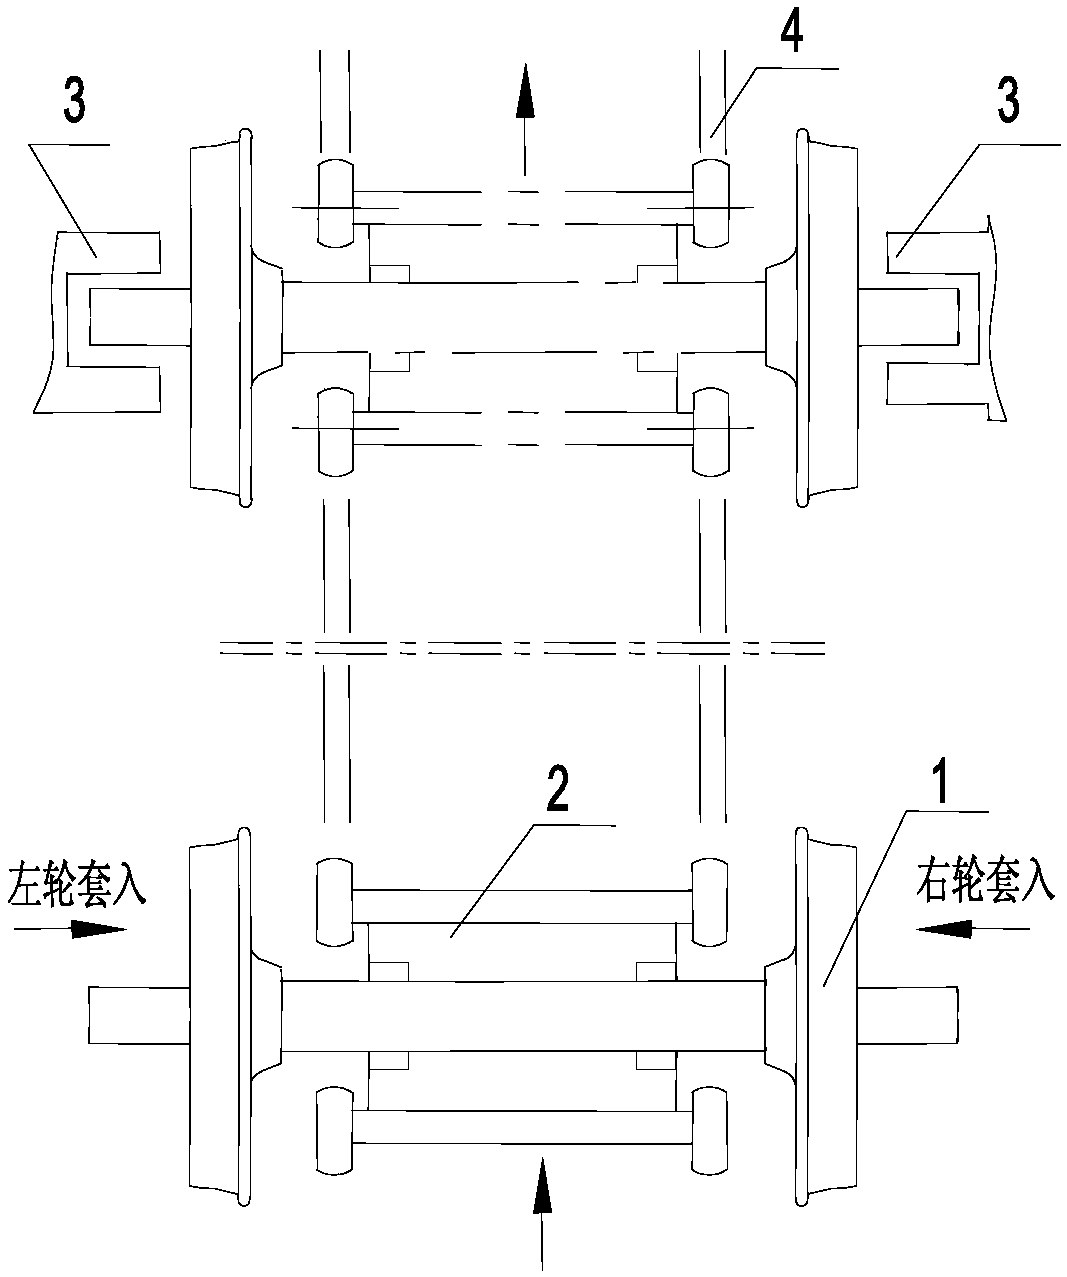 Automatic press fitting rapid conversion device and method for railway wagon wheel pairs